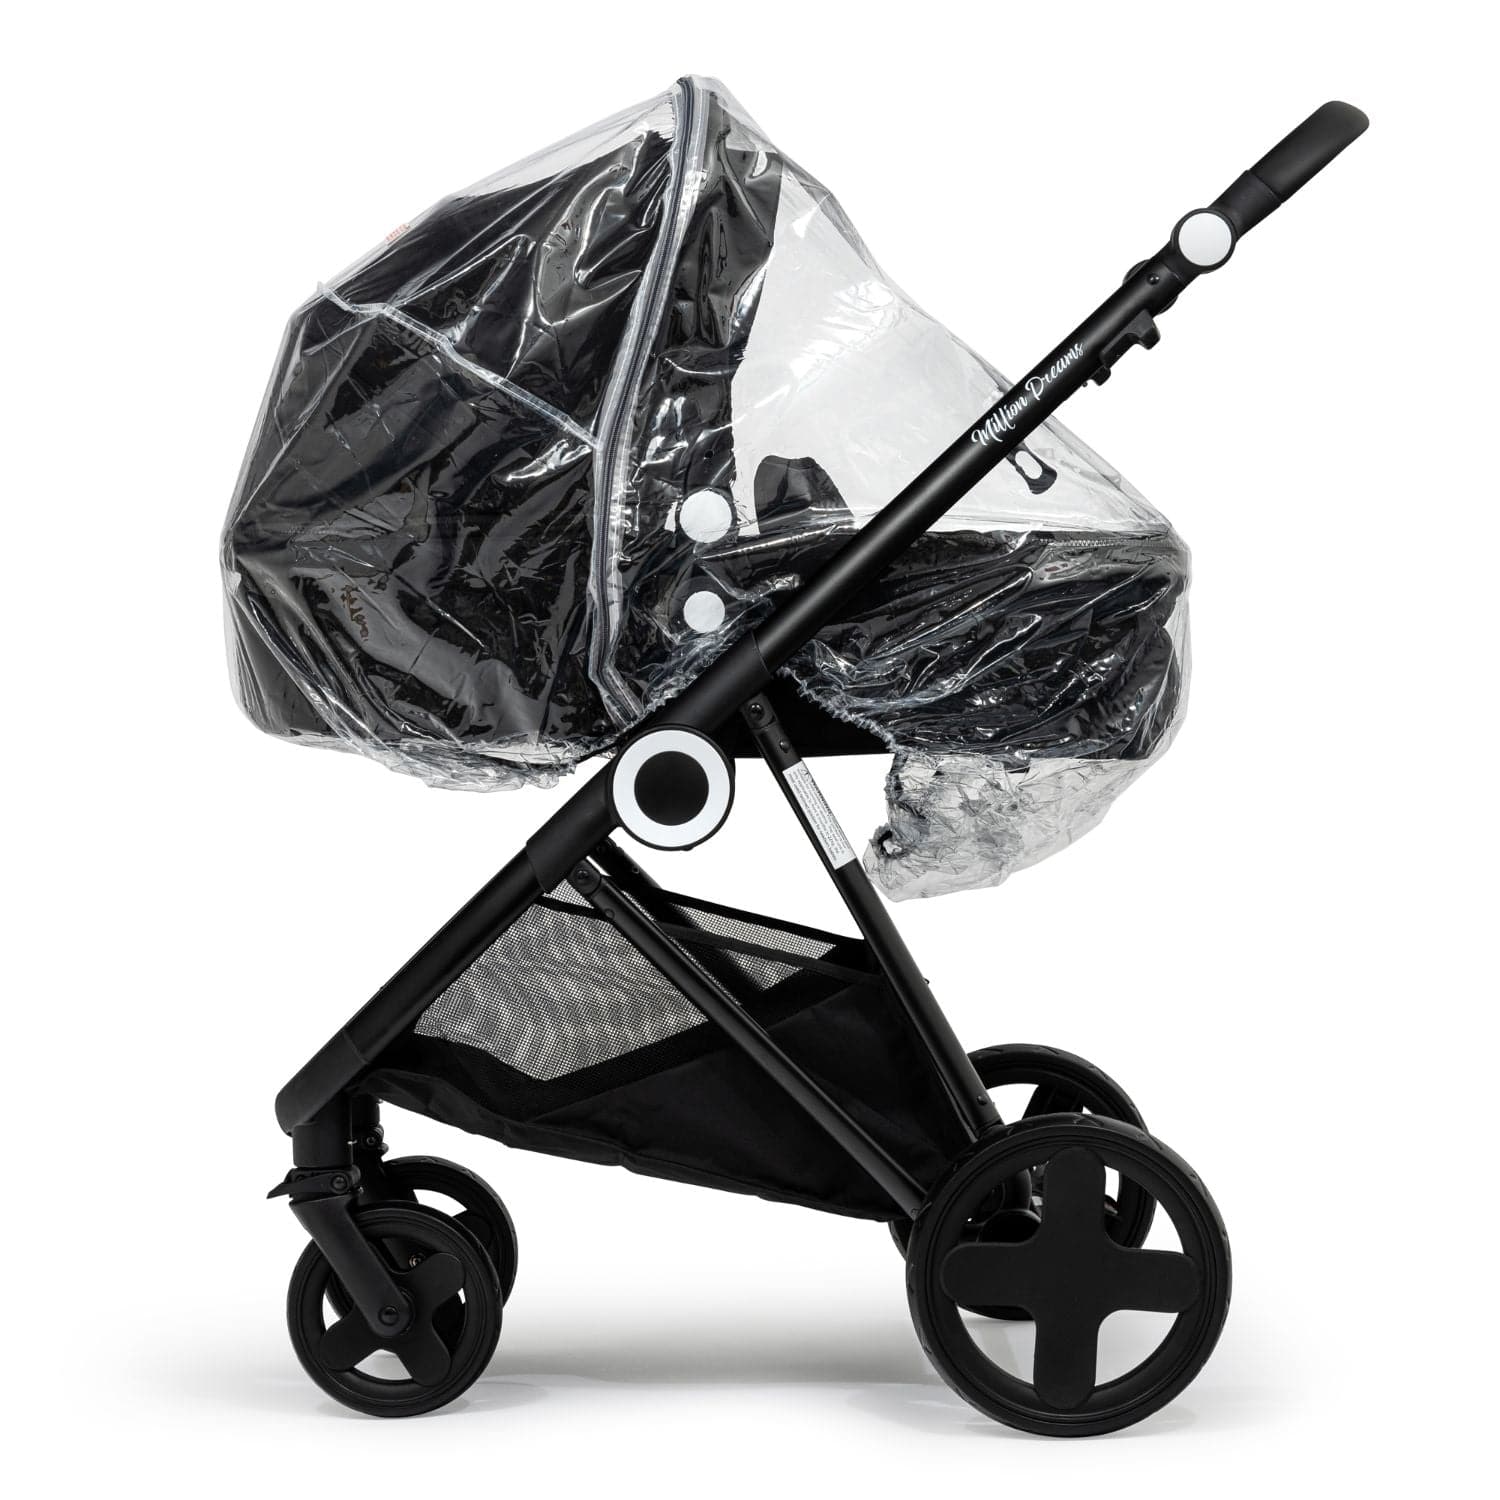 Carrycot Raincover Compatible With Noukies - Fits All Models - For Your Little One